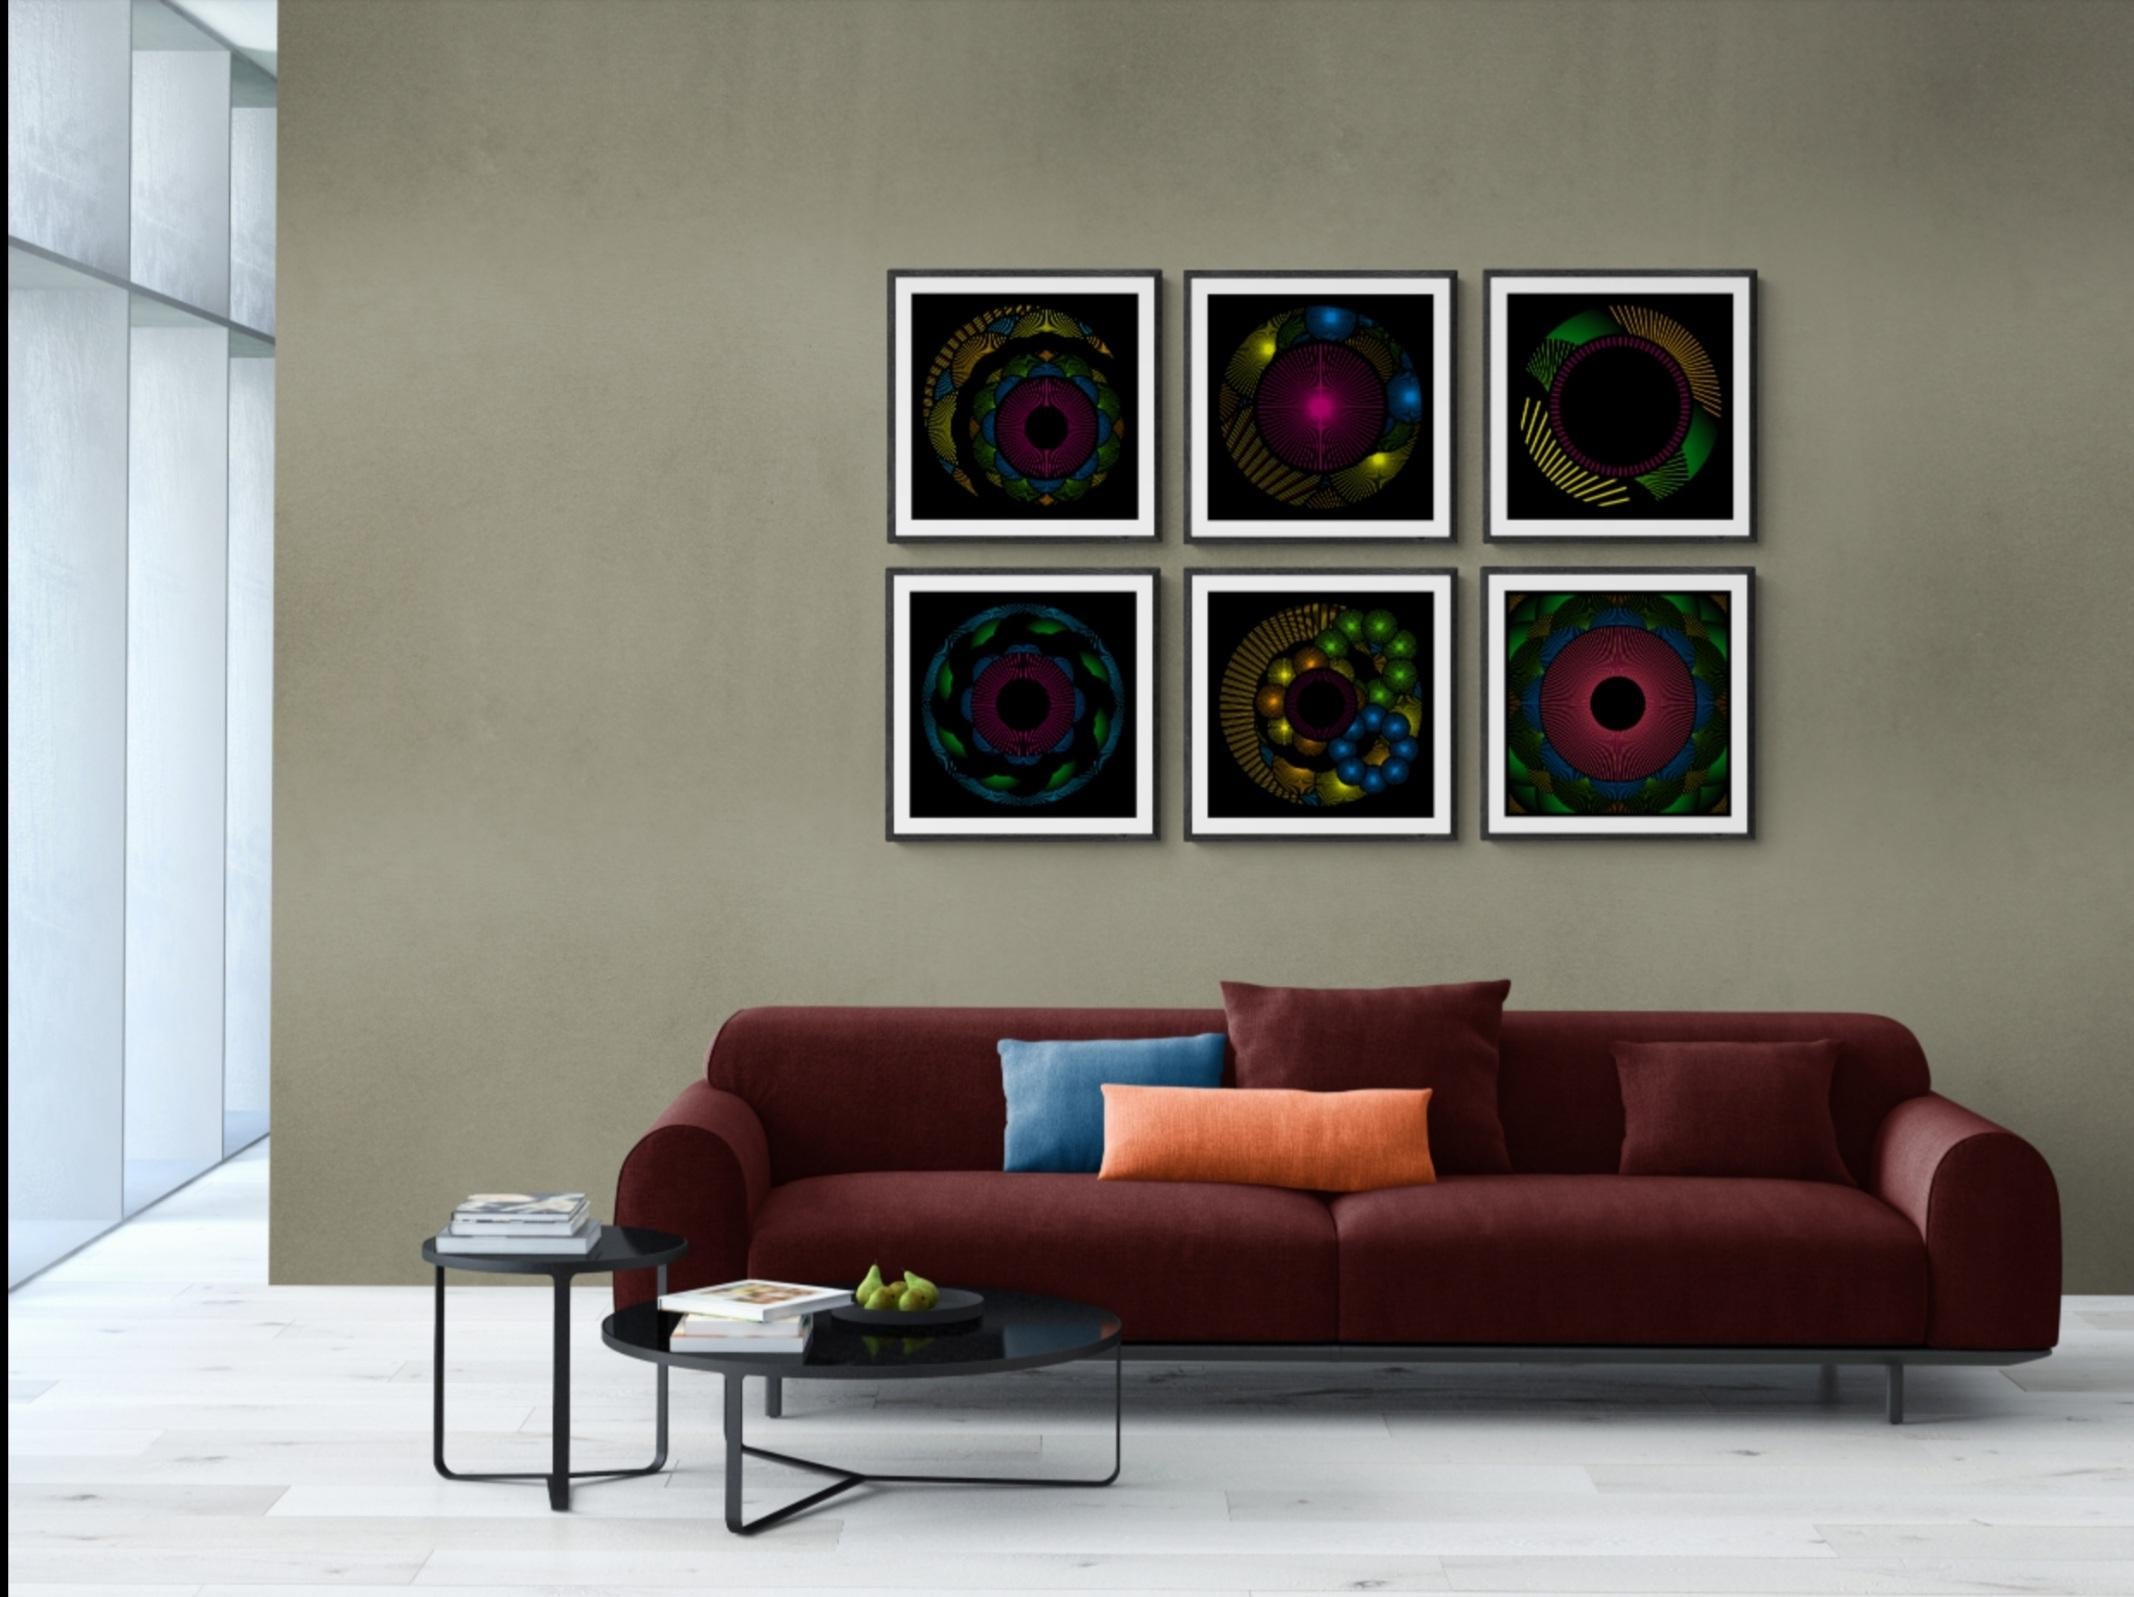 Nebulosa 34 - Abstract Geometric Print by Julio Campos